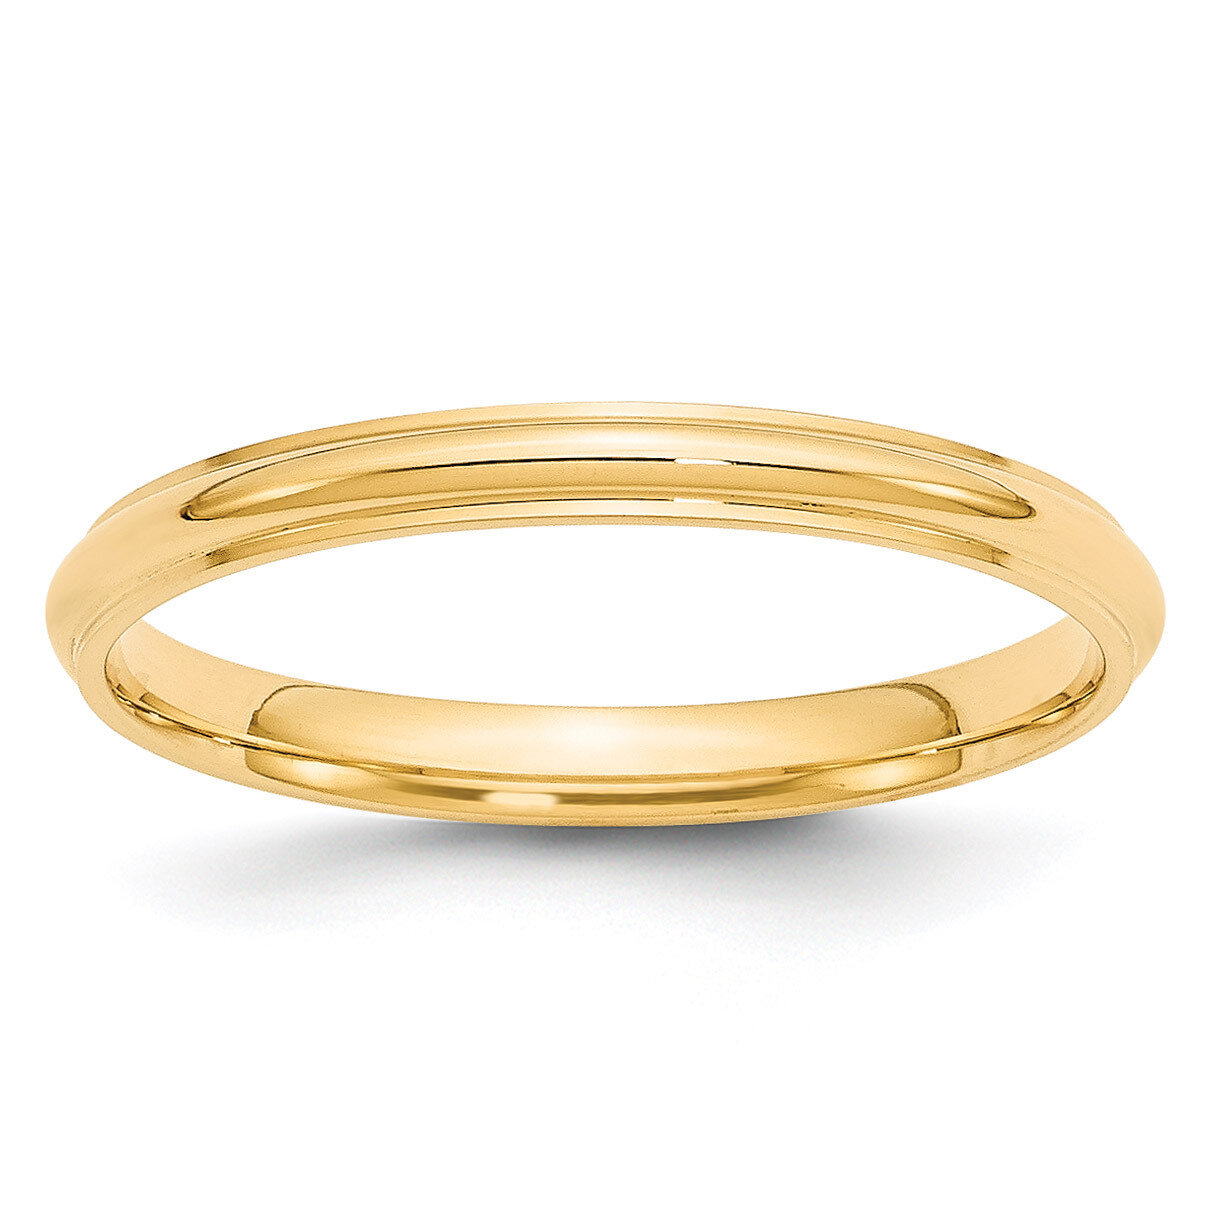 2.5mm Half Round with Edge Band 14k Yellow Gold HRE025 Engravable